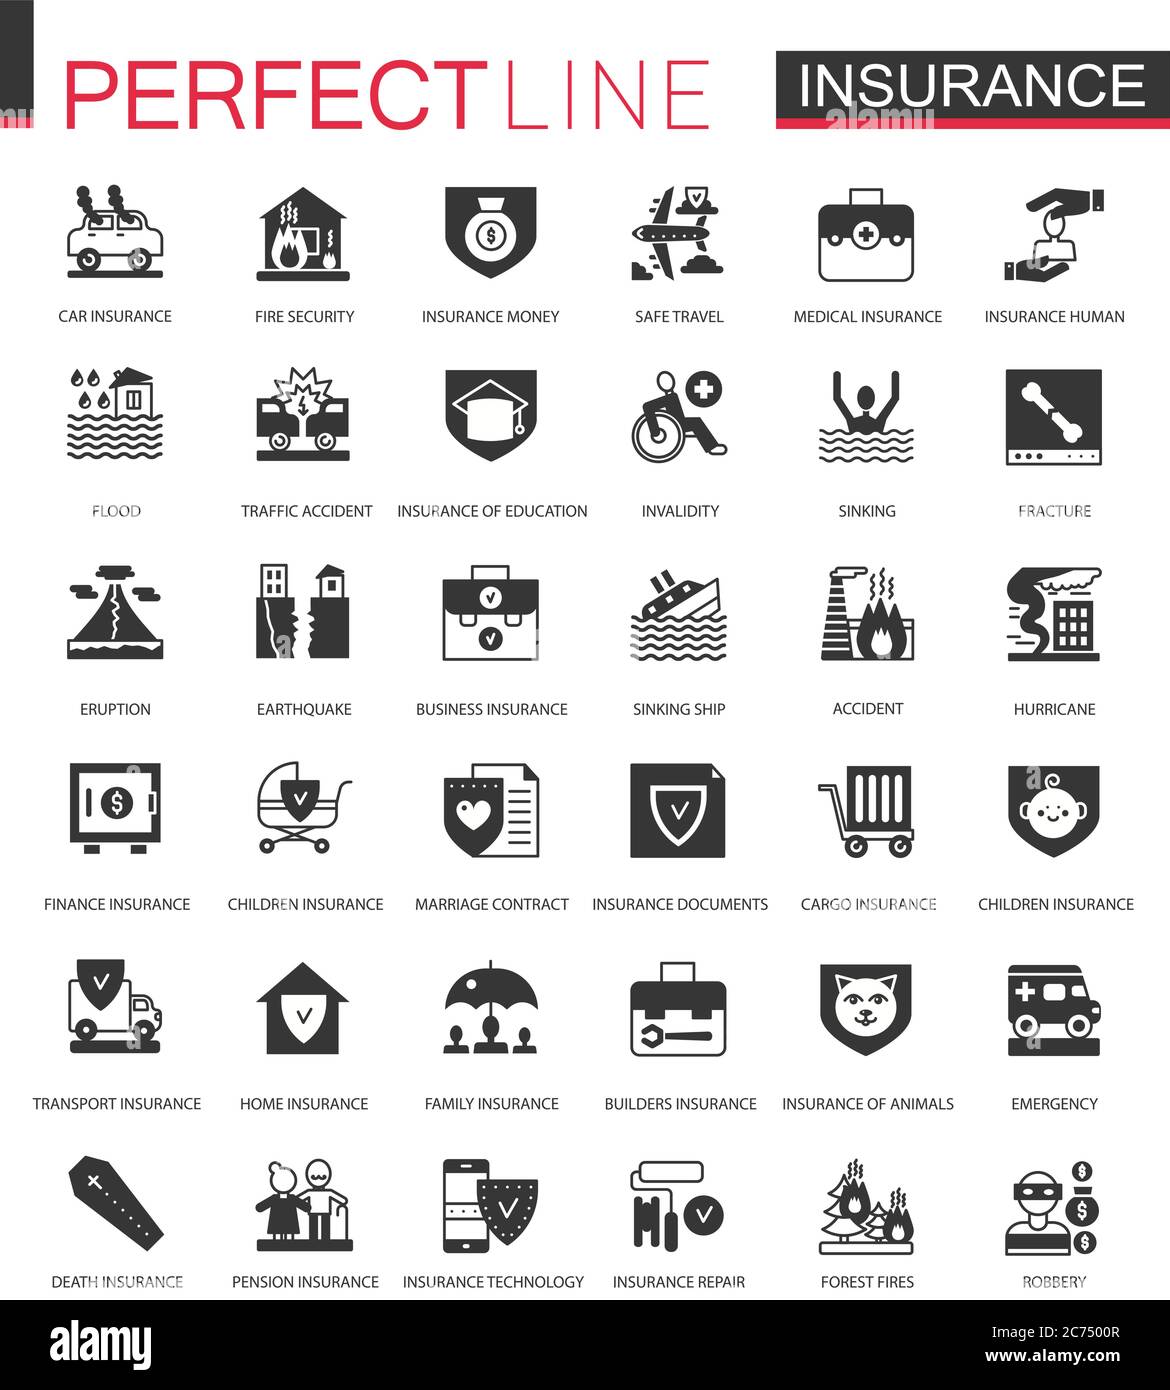 Black classic insurance icons set isolated for web Stock Vector